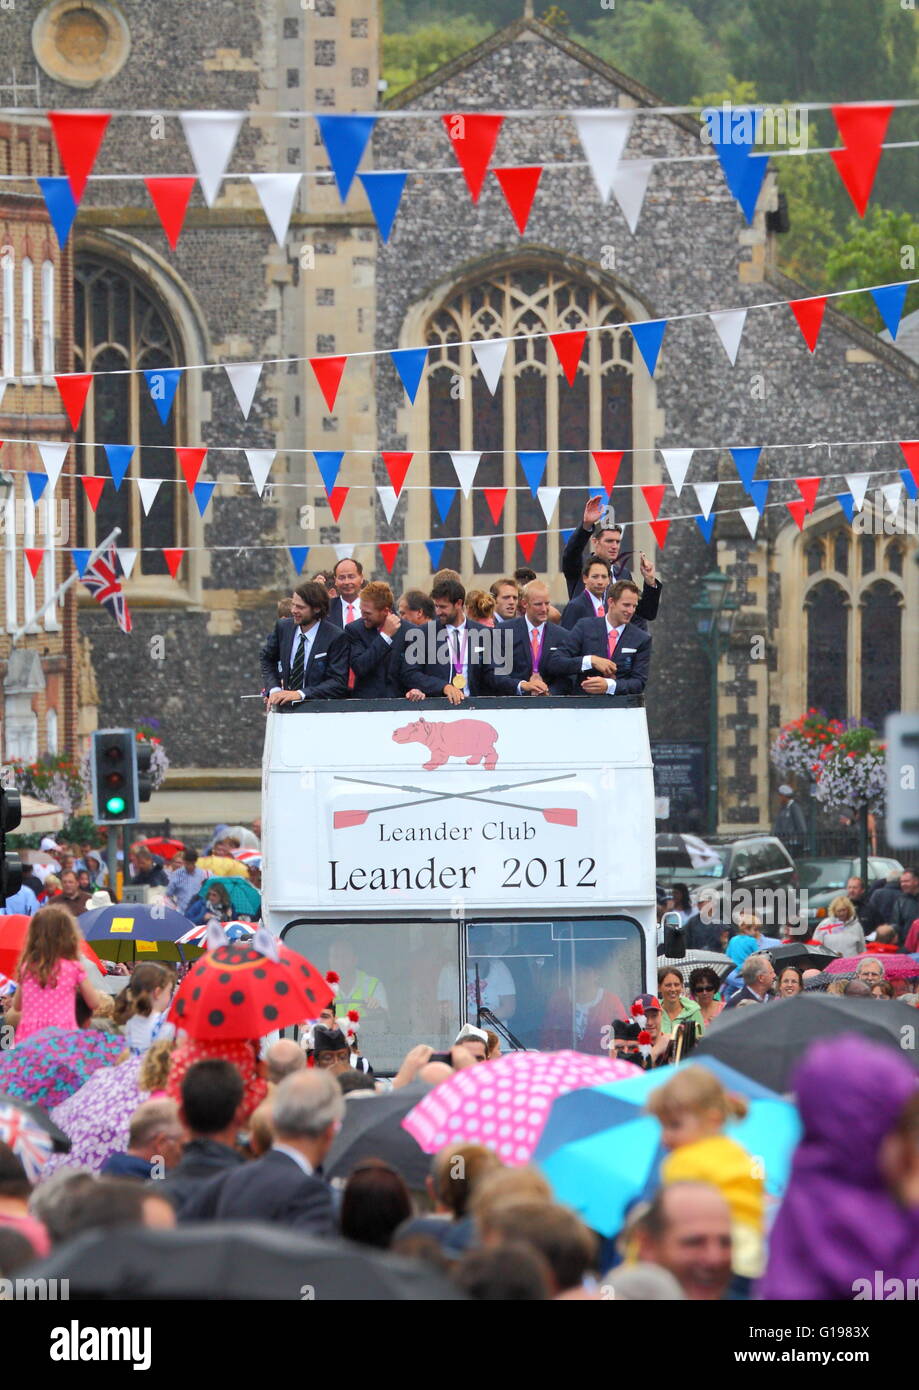 British Rowing Medalists of the 2012 London Olympics get a warm reception In Henley-on-Thames, home of the Leander Club Stock Photo